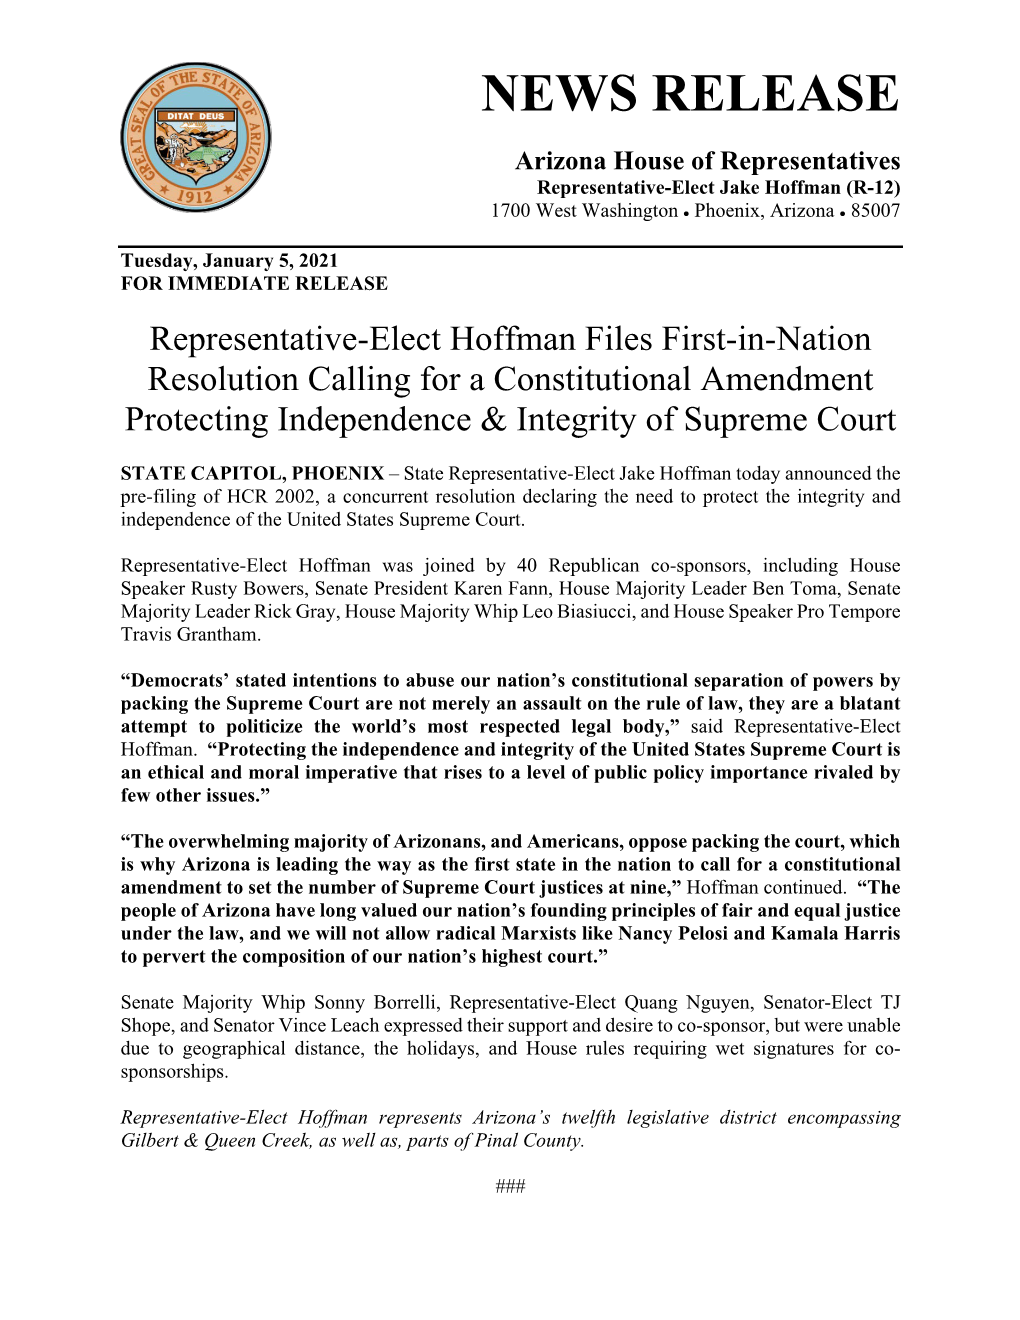 Representative-Elect Hoffman Files First-In-Nation Resolution Calling for a Constitutional Amendment Protecting Independence & Integrity of Supreme Court